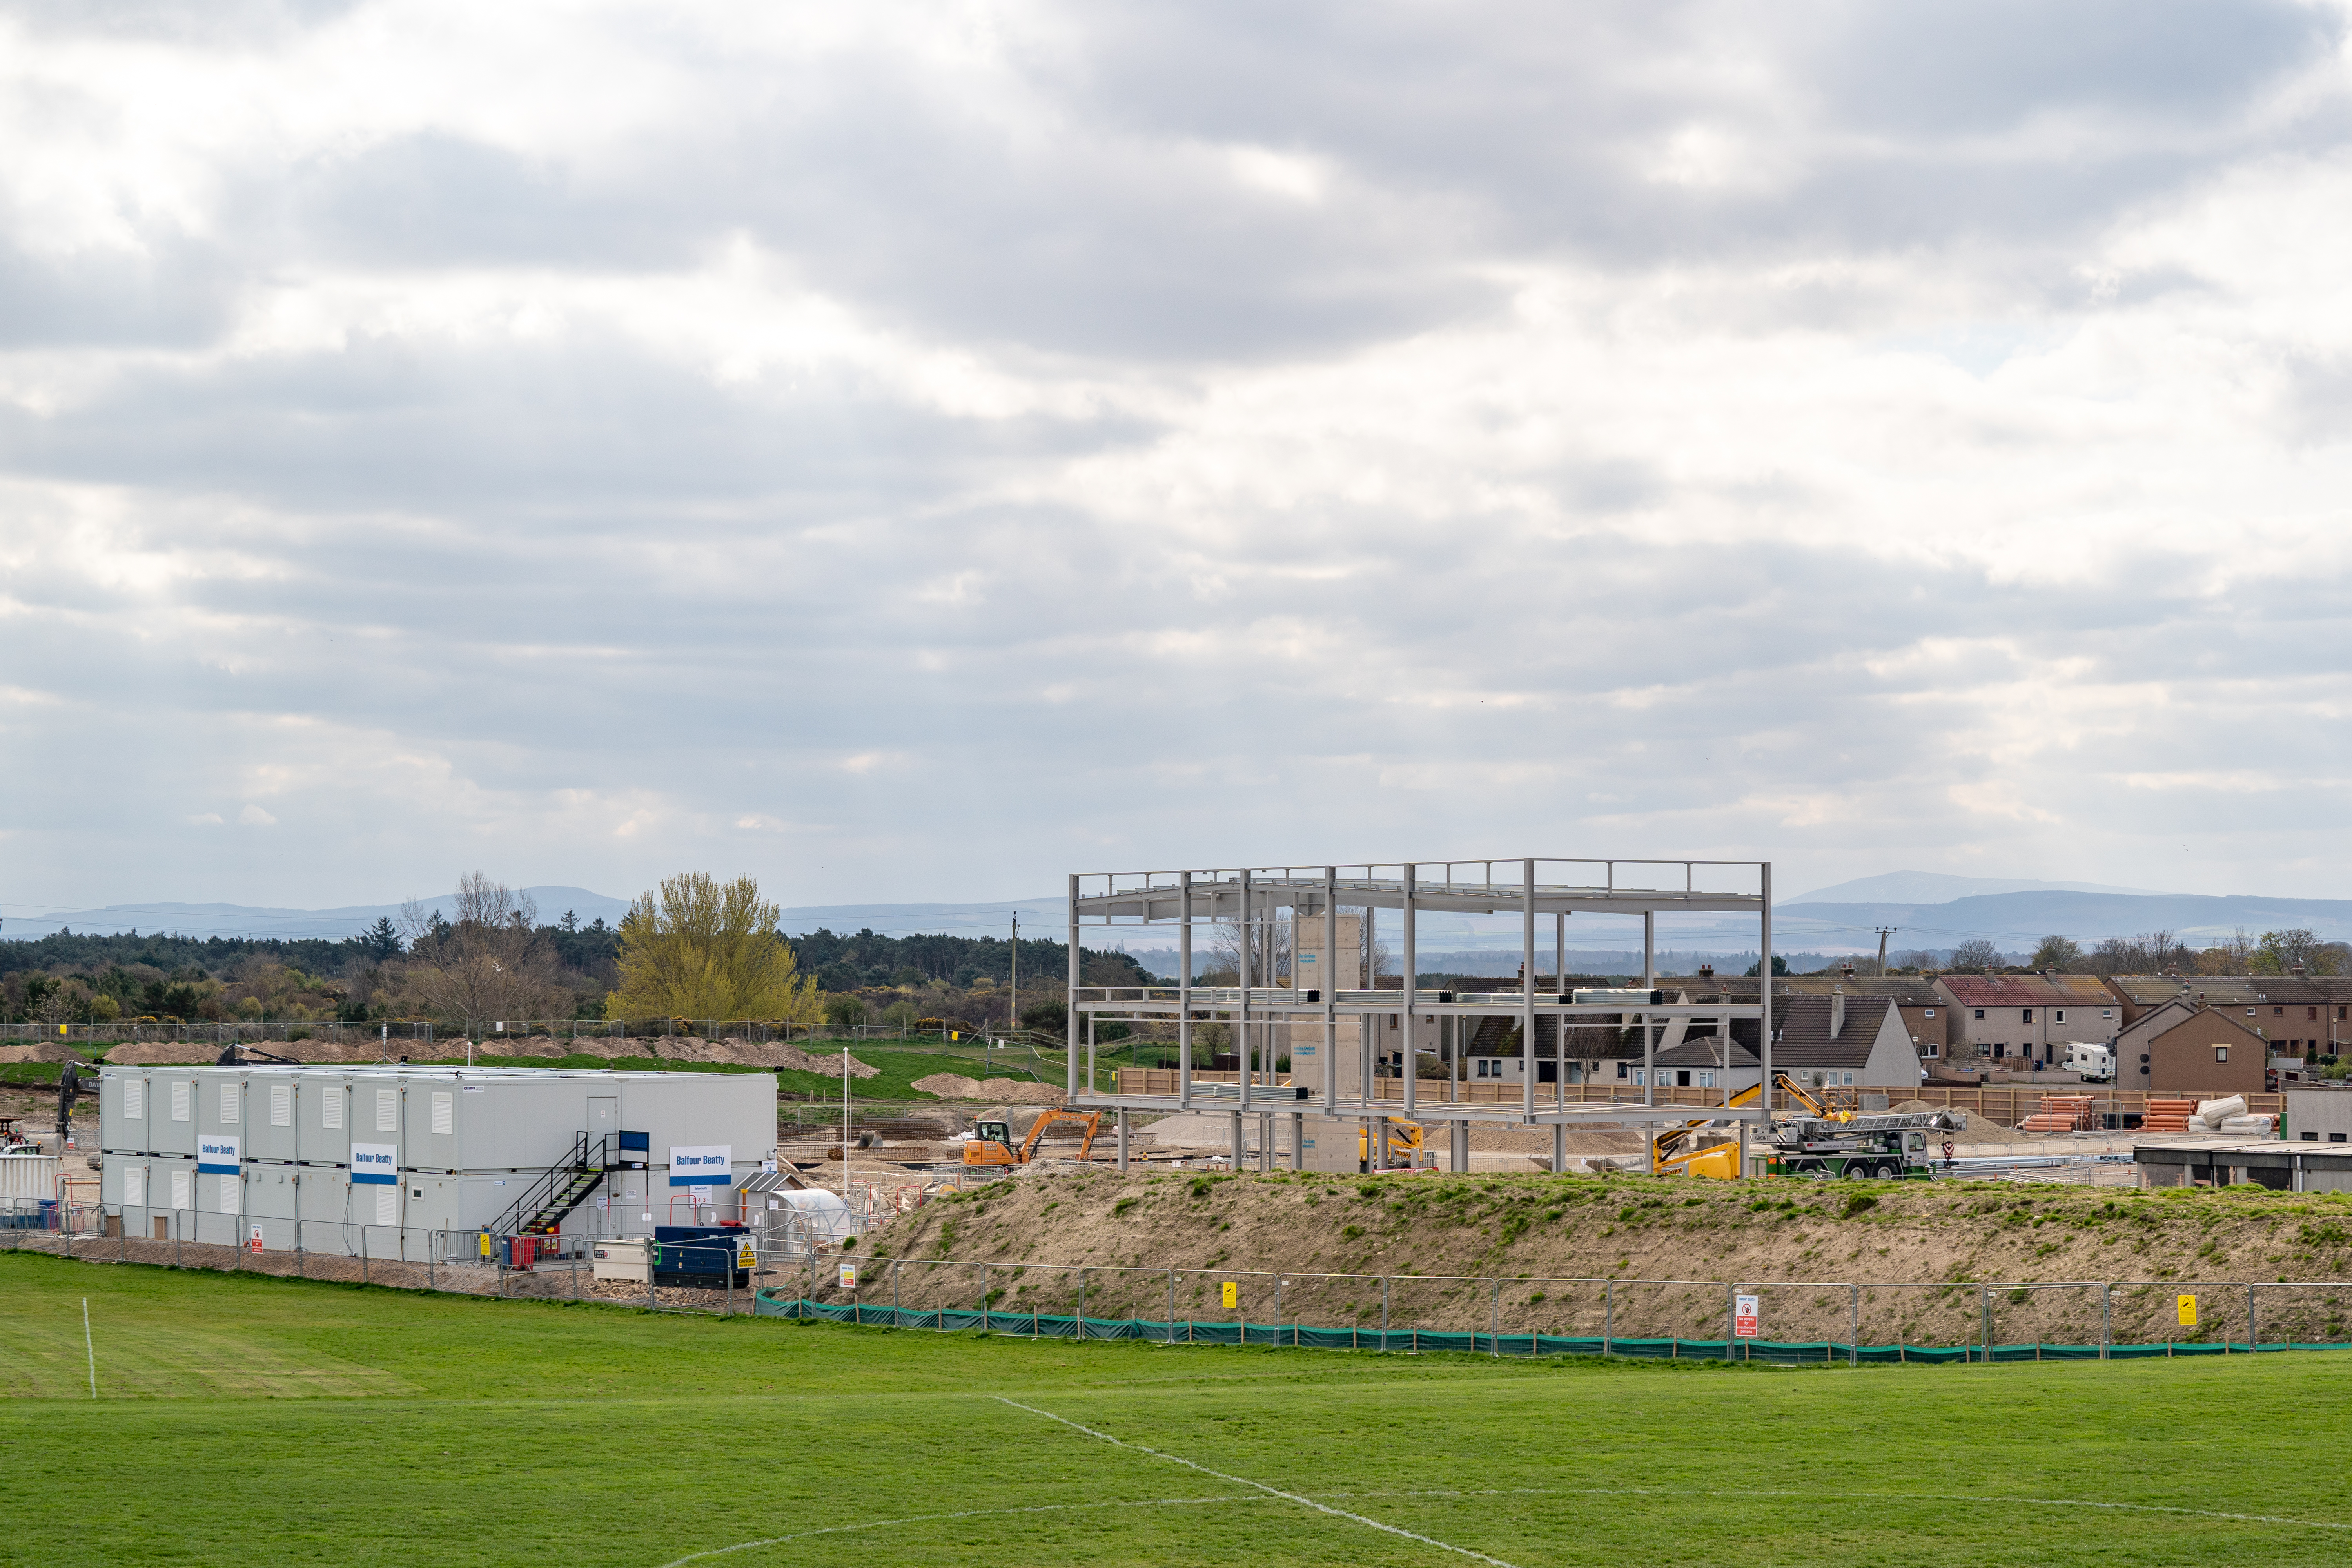 Progress for Lossiemouth High School is ahead of schedule Photographed by JASPERIMAGE ©